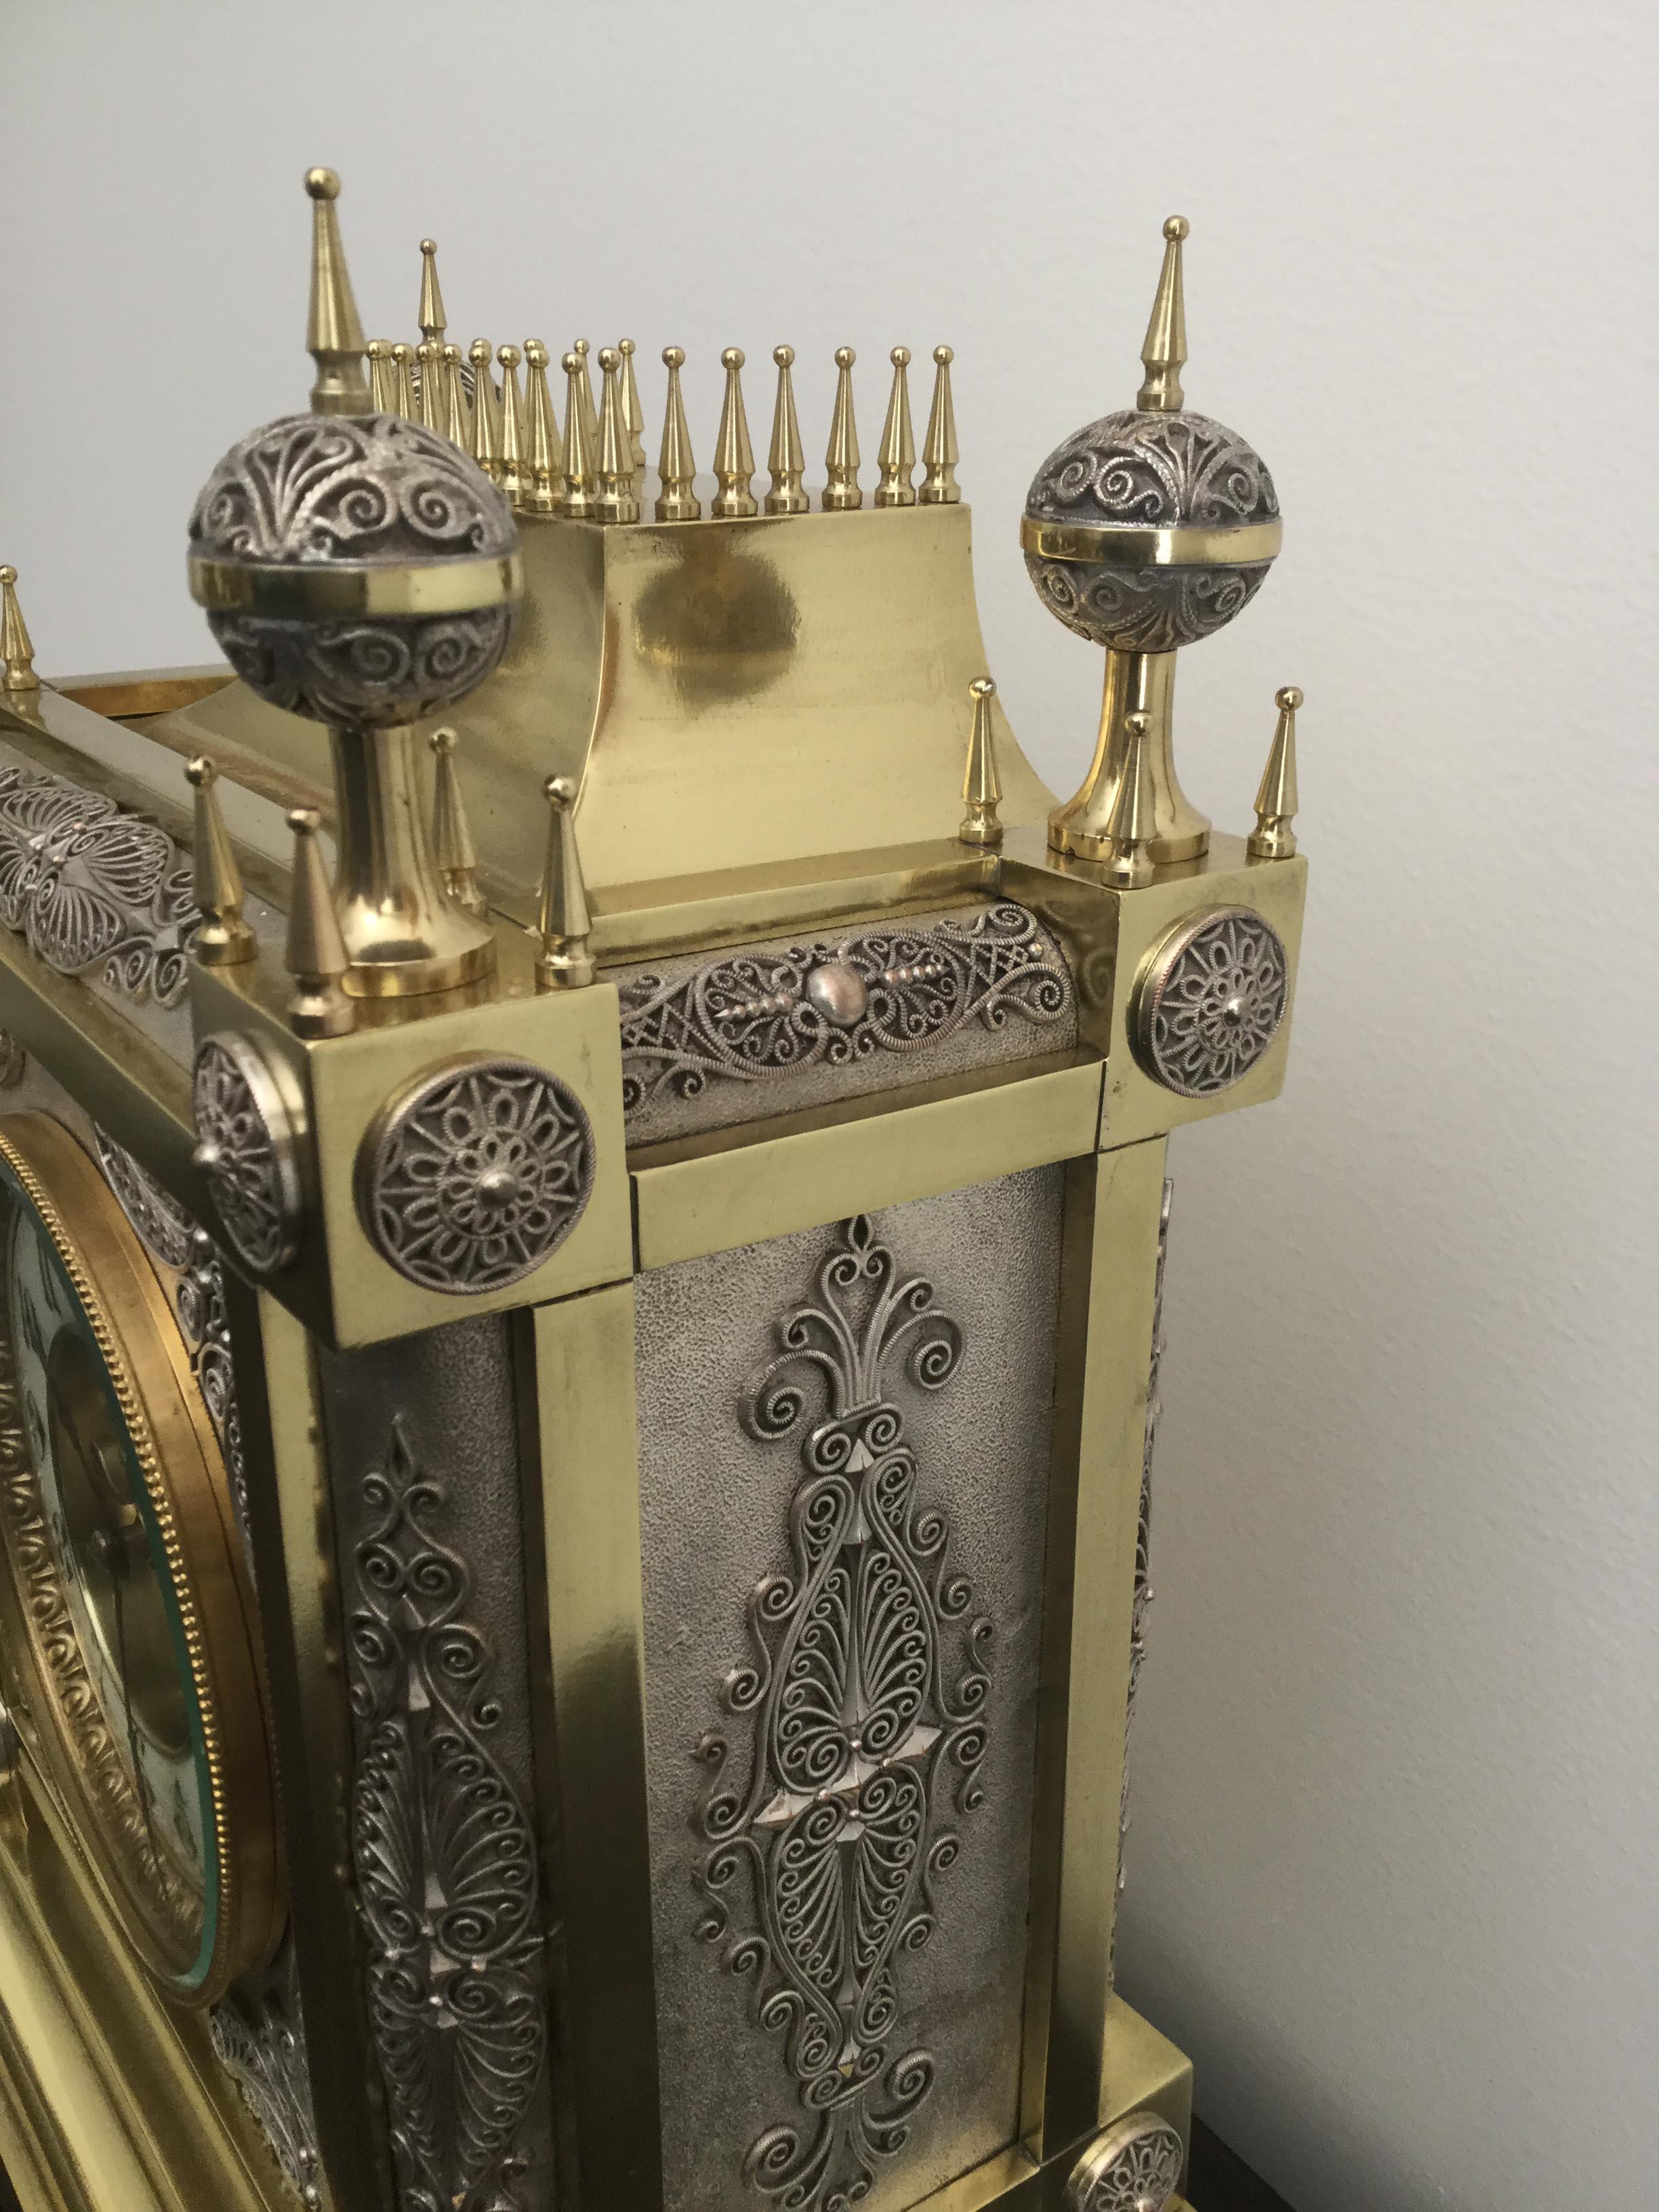 Lacquered French Gothic Style Brass and Silver Filigree Mantel Clock, 19th Century For Sale